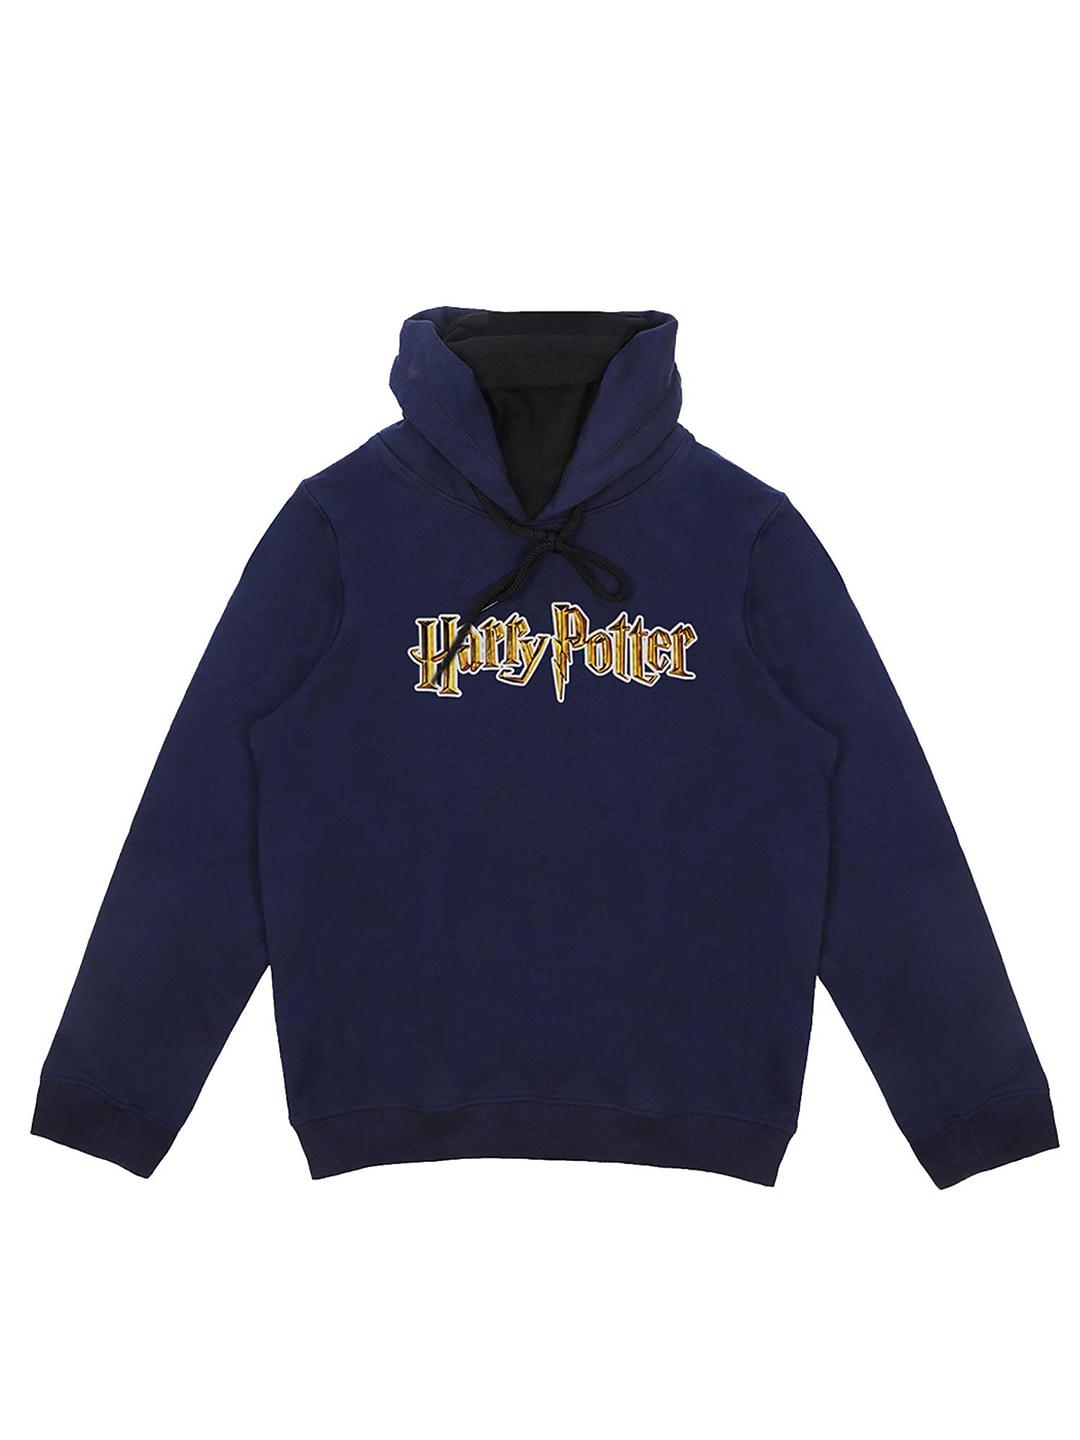 harry-potter-by-wear-your-mind-boys-navy-blue-harry-potter-printed-hooded-sweatshirt